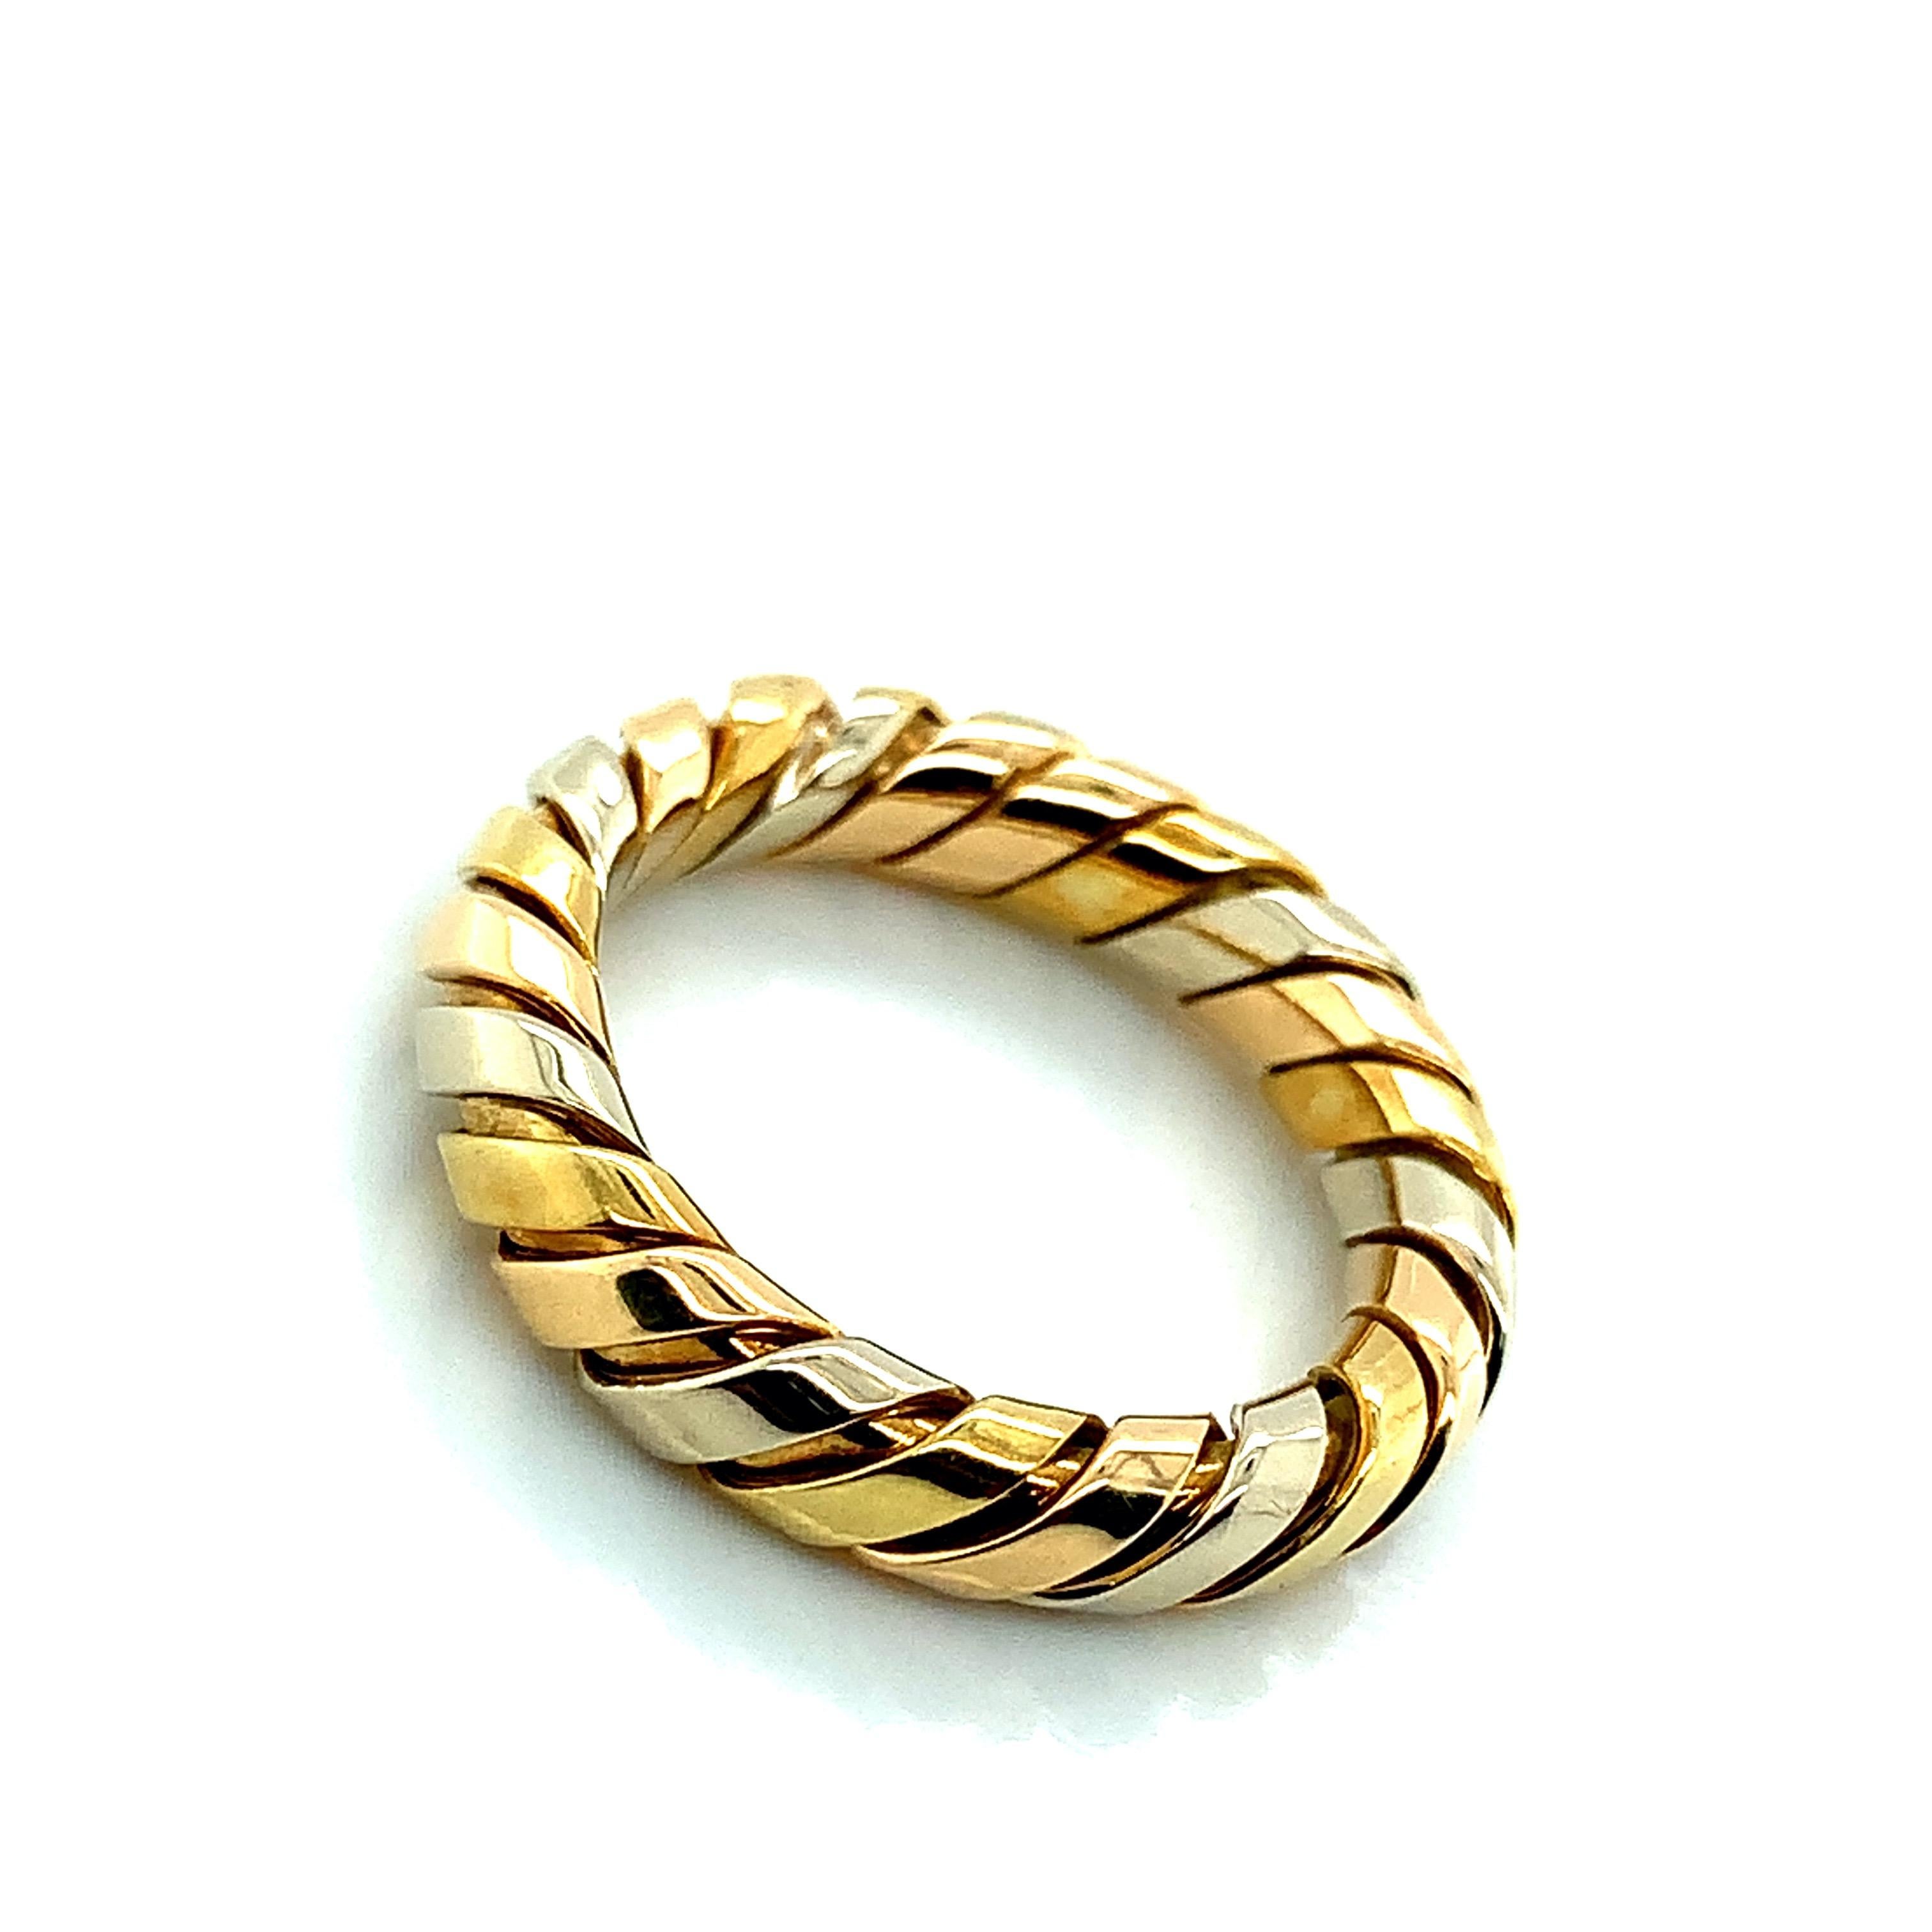 Bvlgari 18 karat yellow, white, and rose gold ring from the iconic Tubogas collection. Marked: Bvlgari / Made in Italy. It weighs 4.9 grams. Size 6-6.25.